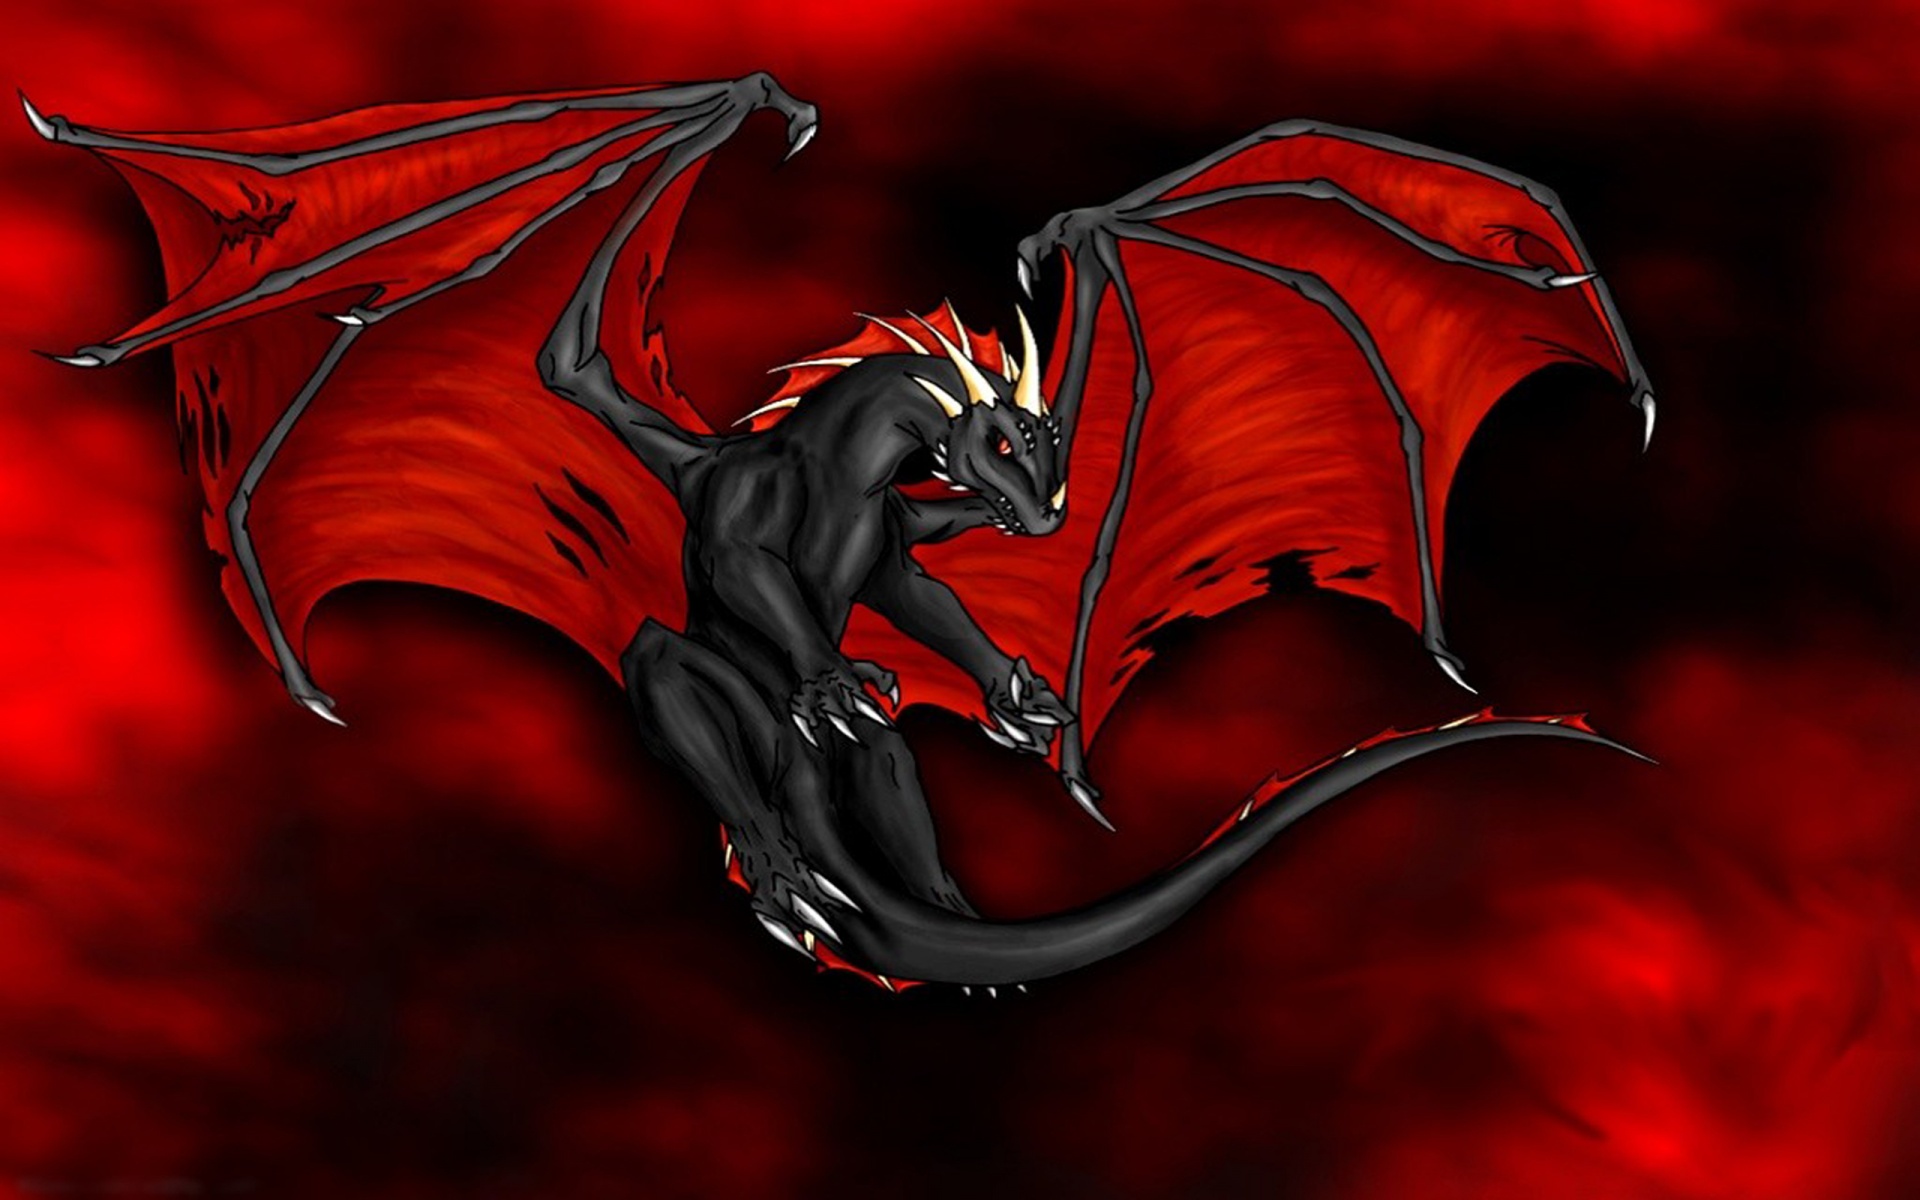 Red Dragons wallpapers Red Dragons background